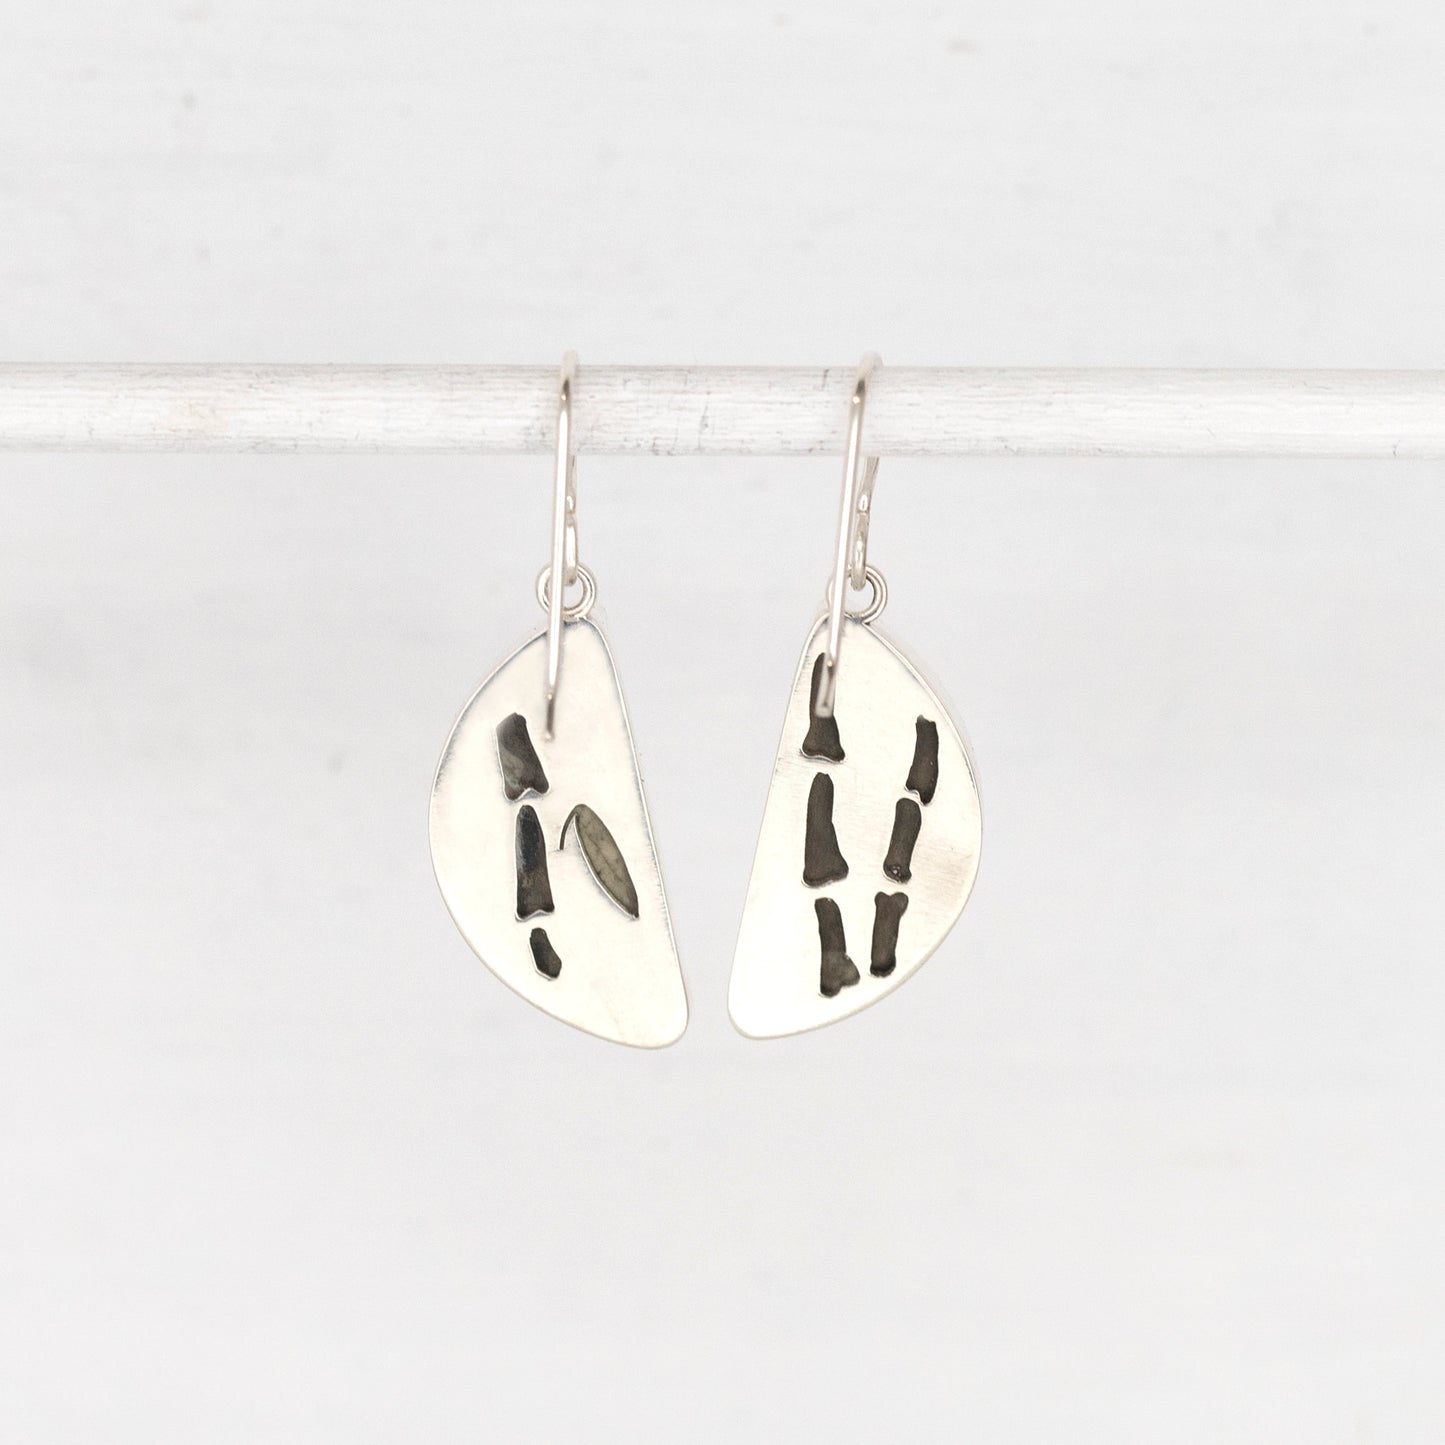 Chinese Writing Stone Dangle Earrings with Bamboo